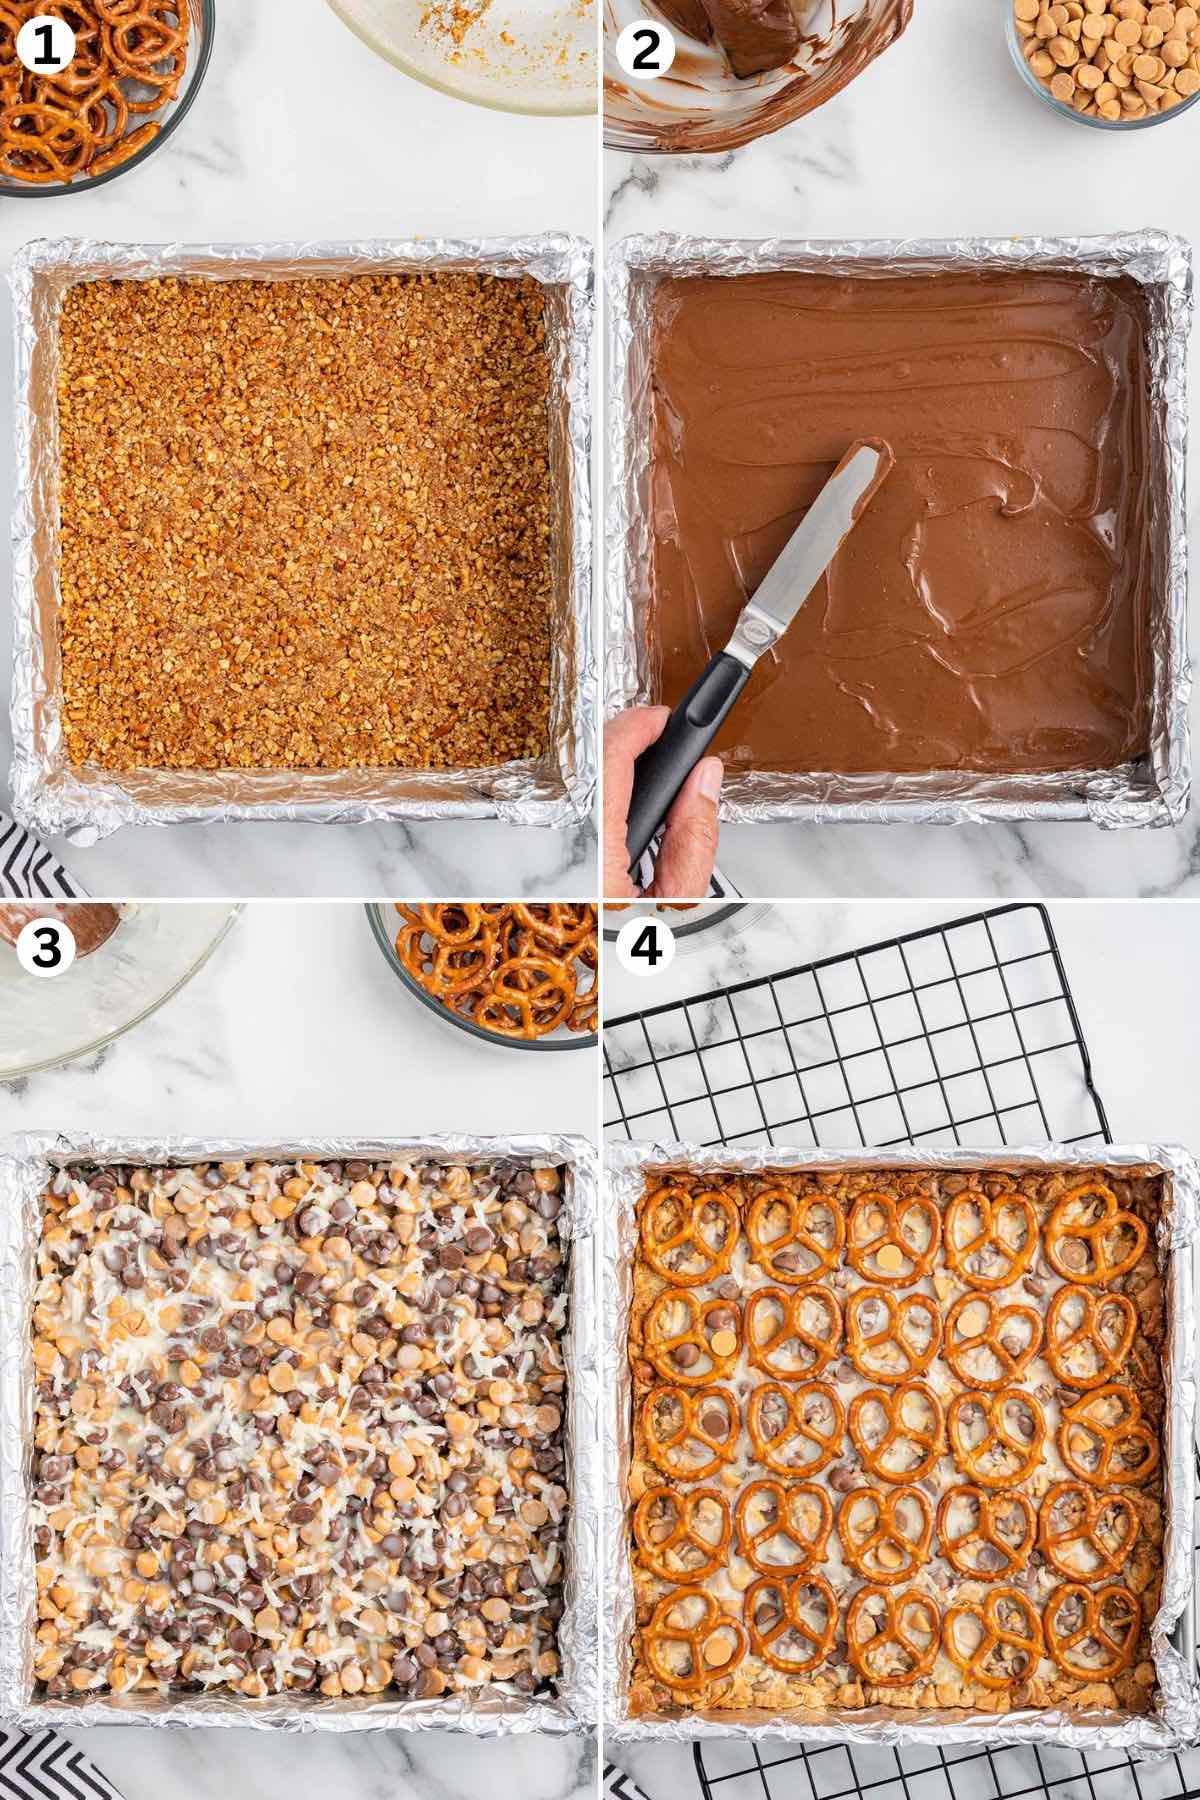 crust layer on a square baking pan. adding the chocolate layer on top of the crust. chocolate chip layer on top of the chocolate. a couple of pretzels on top of the chocolate chip layer.